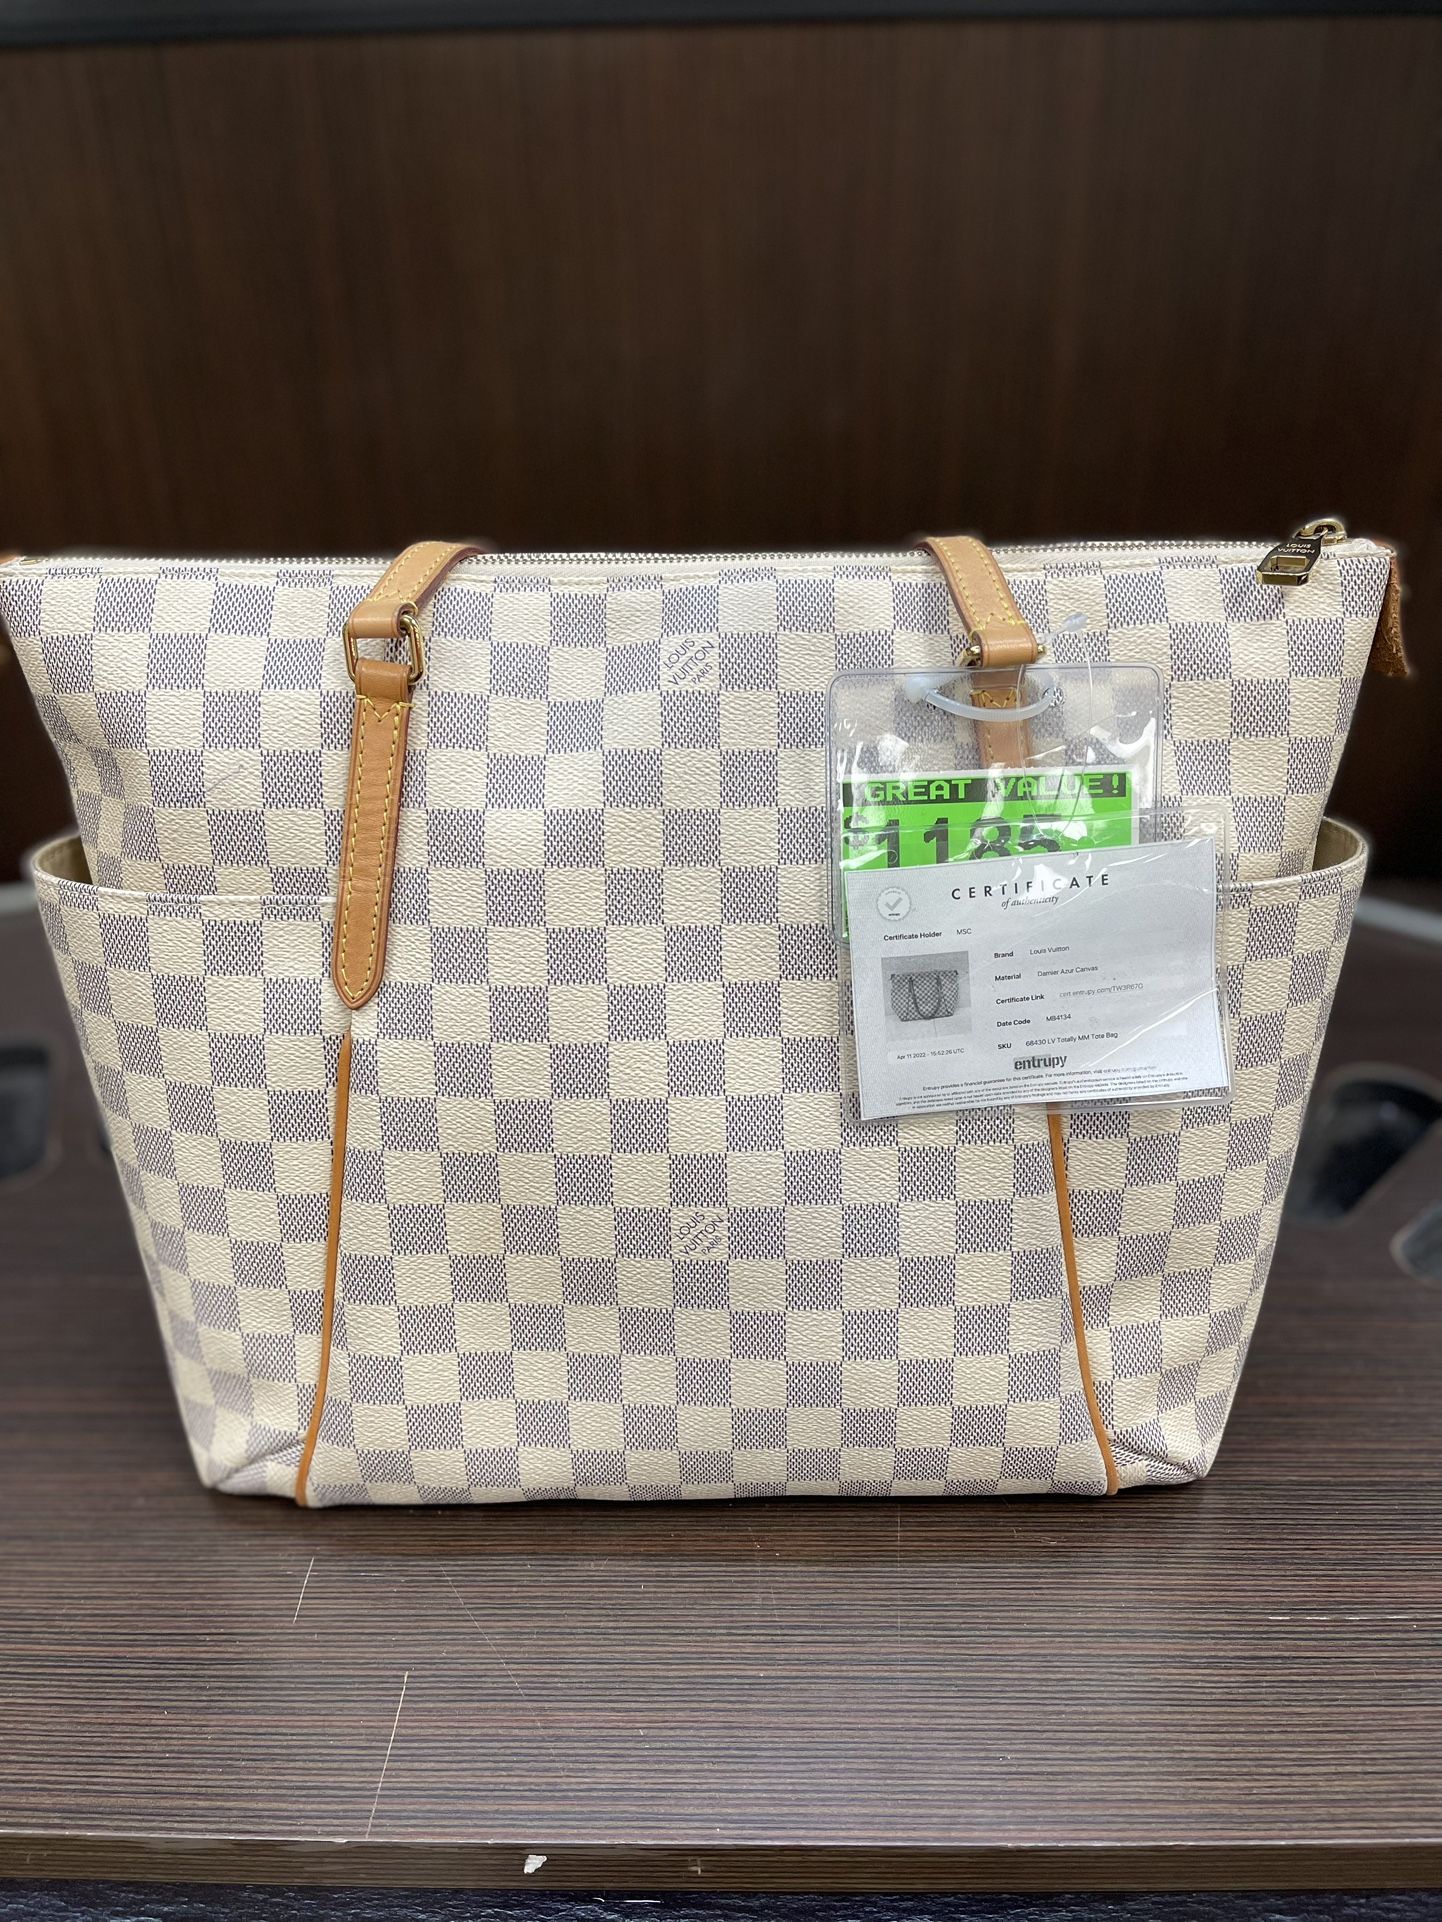 Louis Vuitton Totally Mm In Azur for Sale in Kingsvl Naval, TX - OfferUp